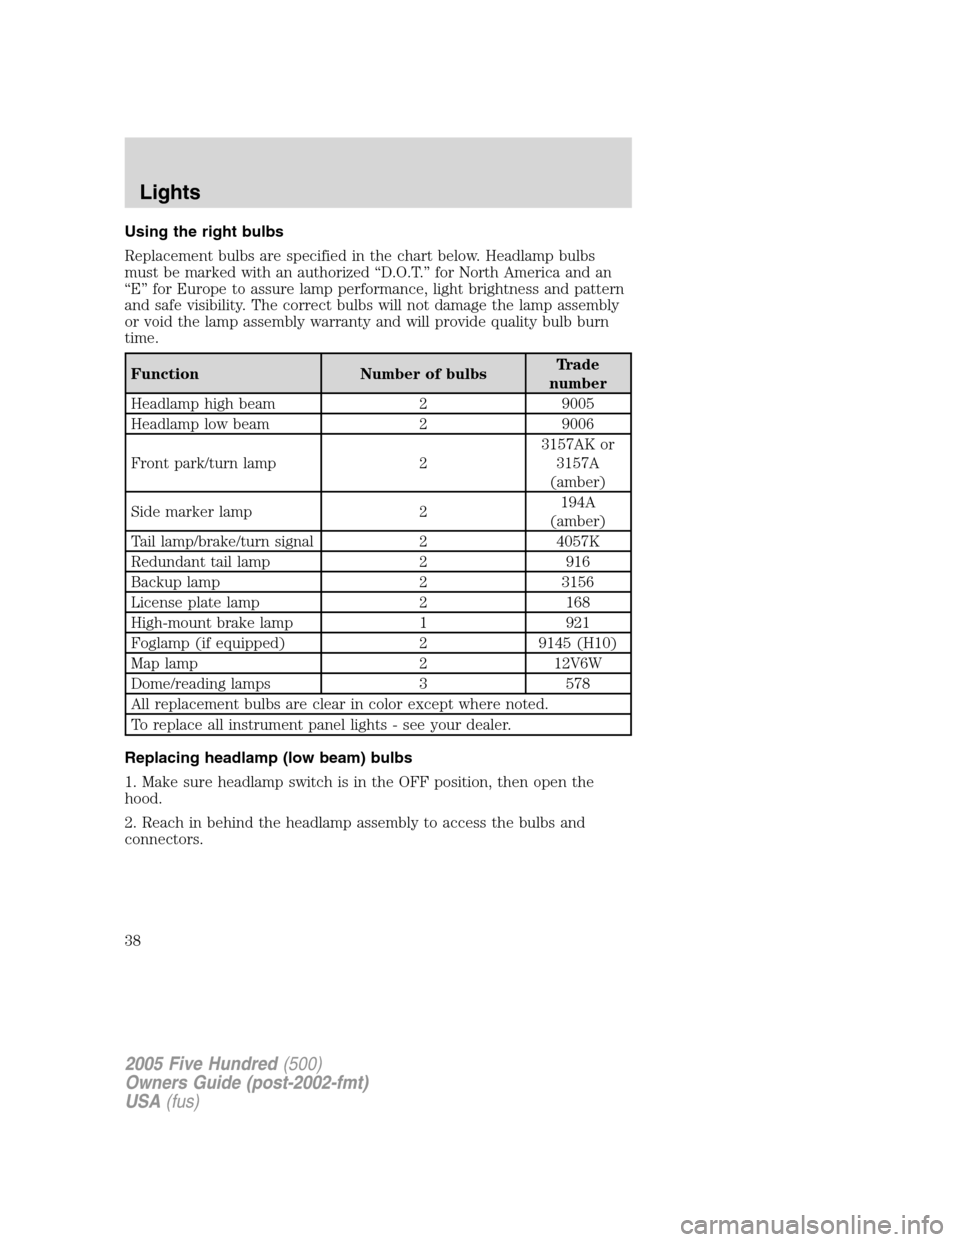 FORD FIVE HUNDRED 2005 D258 / 1.G Owners Manual Using the right bulbs
Replacement bulbs are specified in the chart below. Headlamp bulbs
must be marked with an authorized “D.O.T.” for North America and an
“E” for Europe to assure lamp perfo